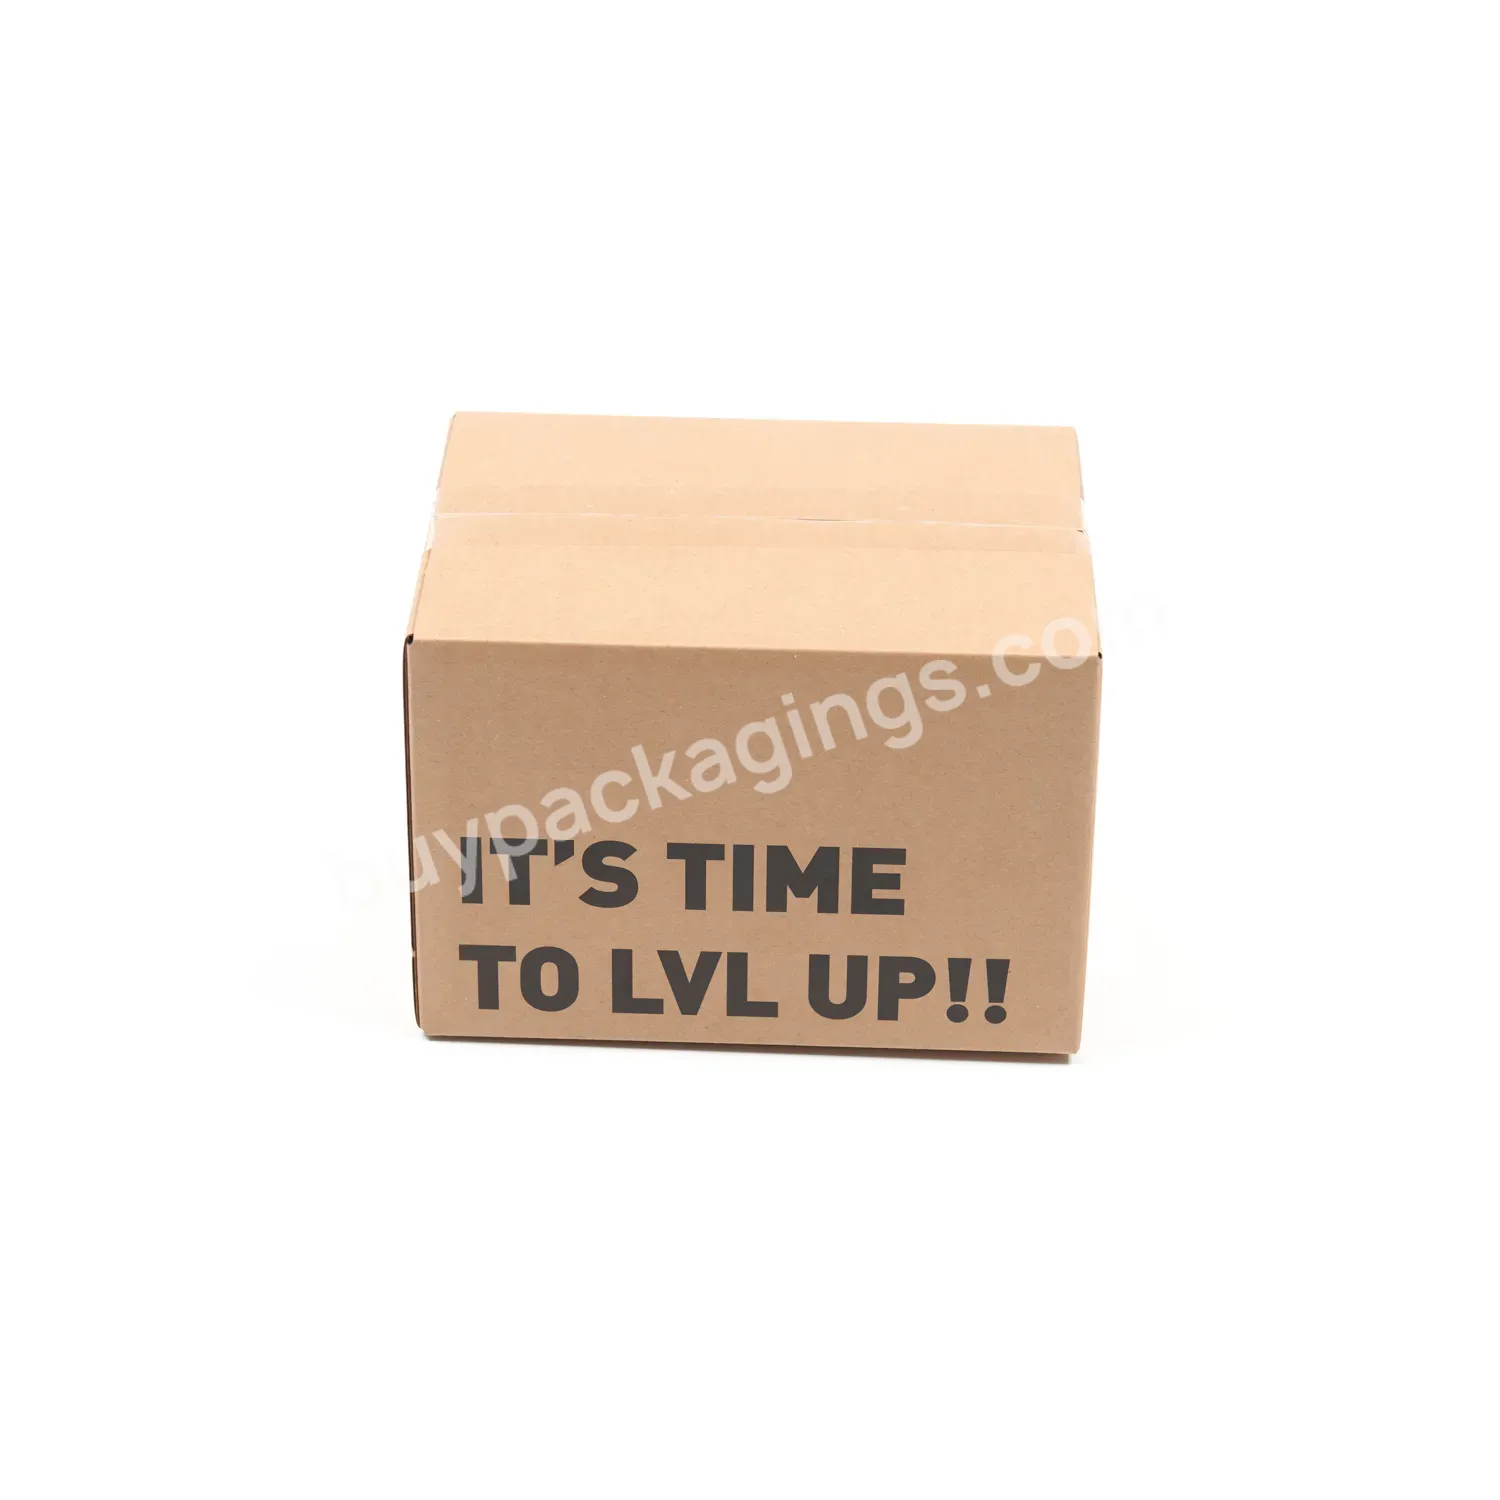 Factory Brown Regular Shipping Box Kraft Corrugated Paper Box For Express Delivery For Small Business Stores